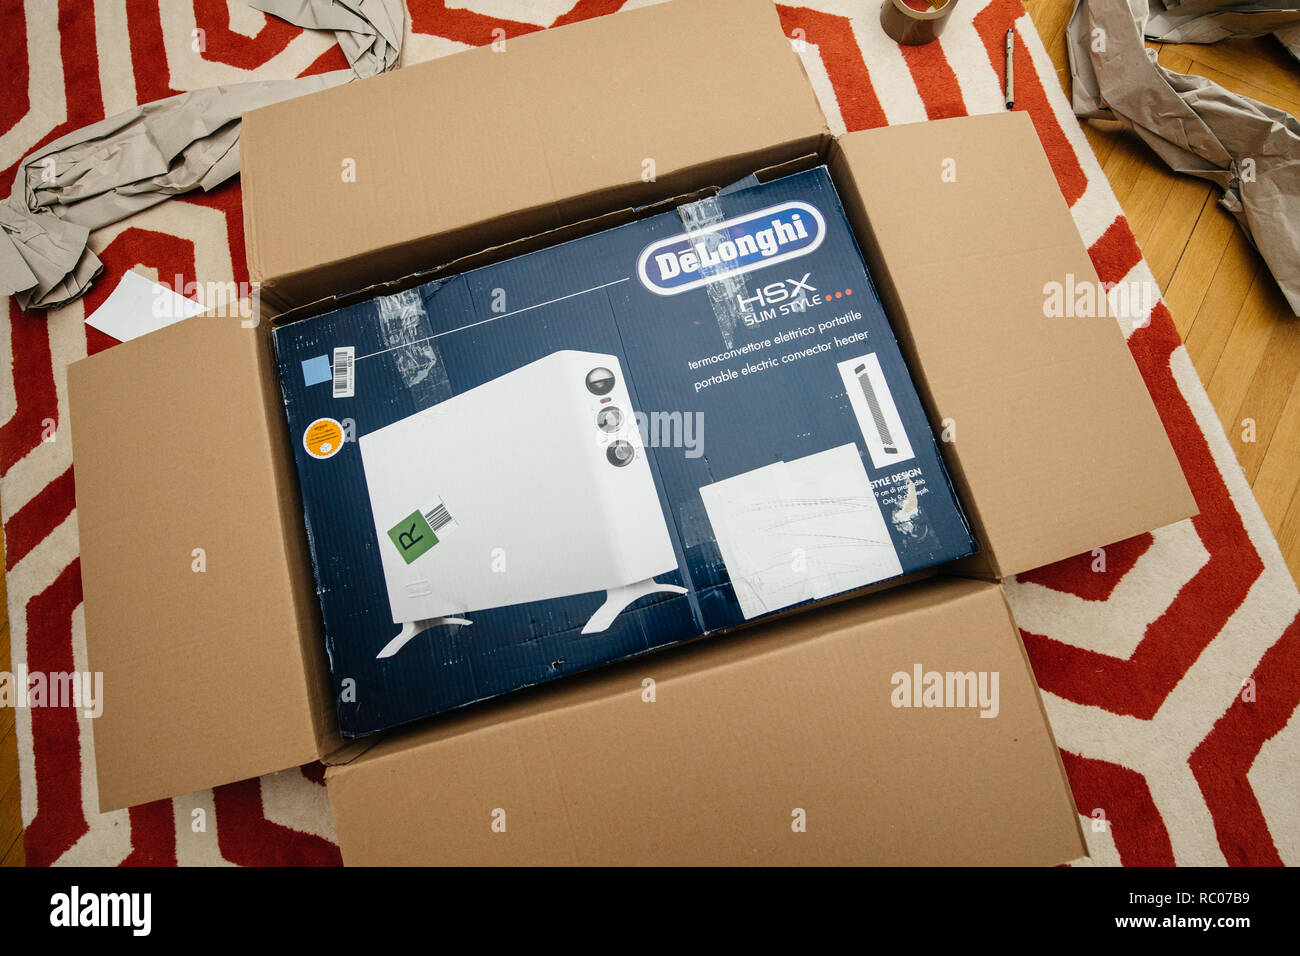 PARIS, FRANCE - FEB 7, 2018: Unboxing large cardboard box containing  italian DeLonghi air convection heater bought from Amazon Warehouse Deals  Stock Photo - Alamy